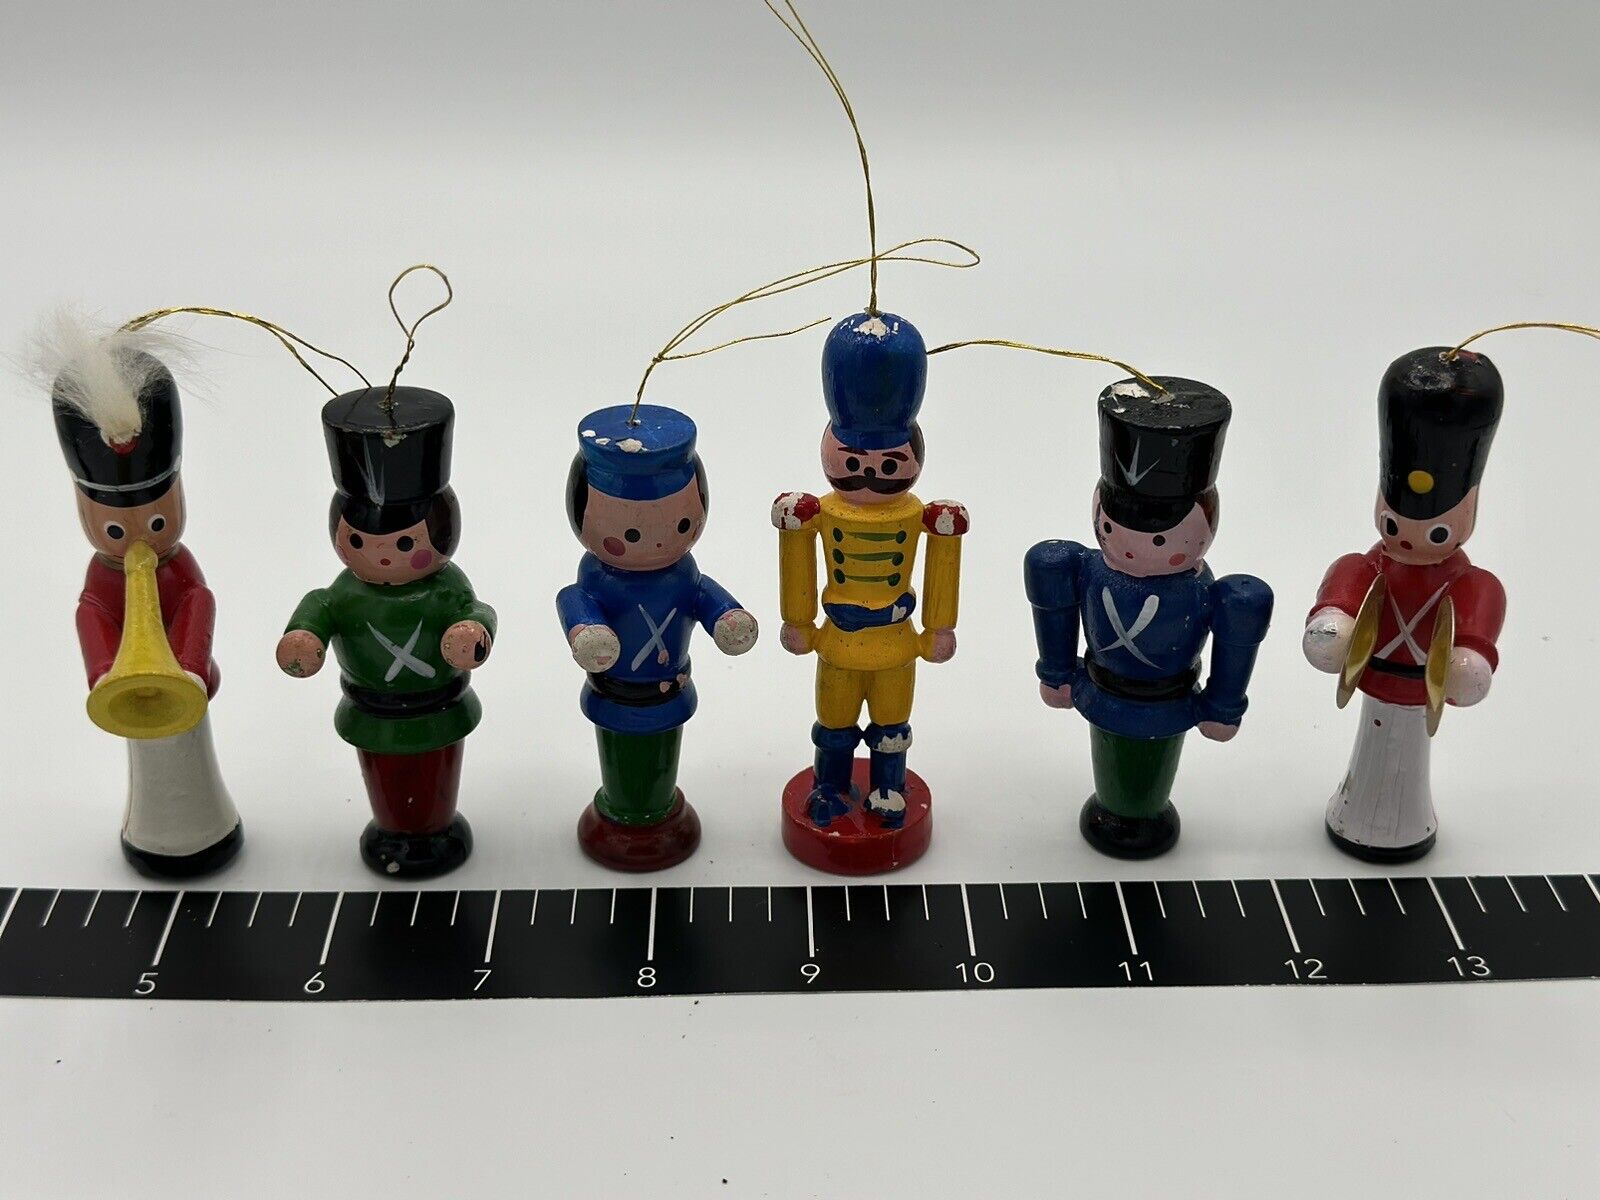 Vintage Christmas Ornaments Hand-Painted Wood Toy Soldiers Lot of 6 